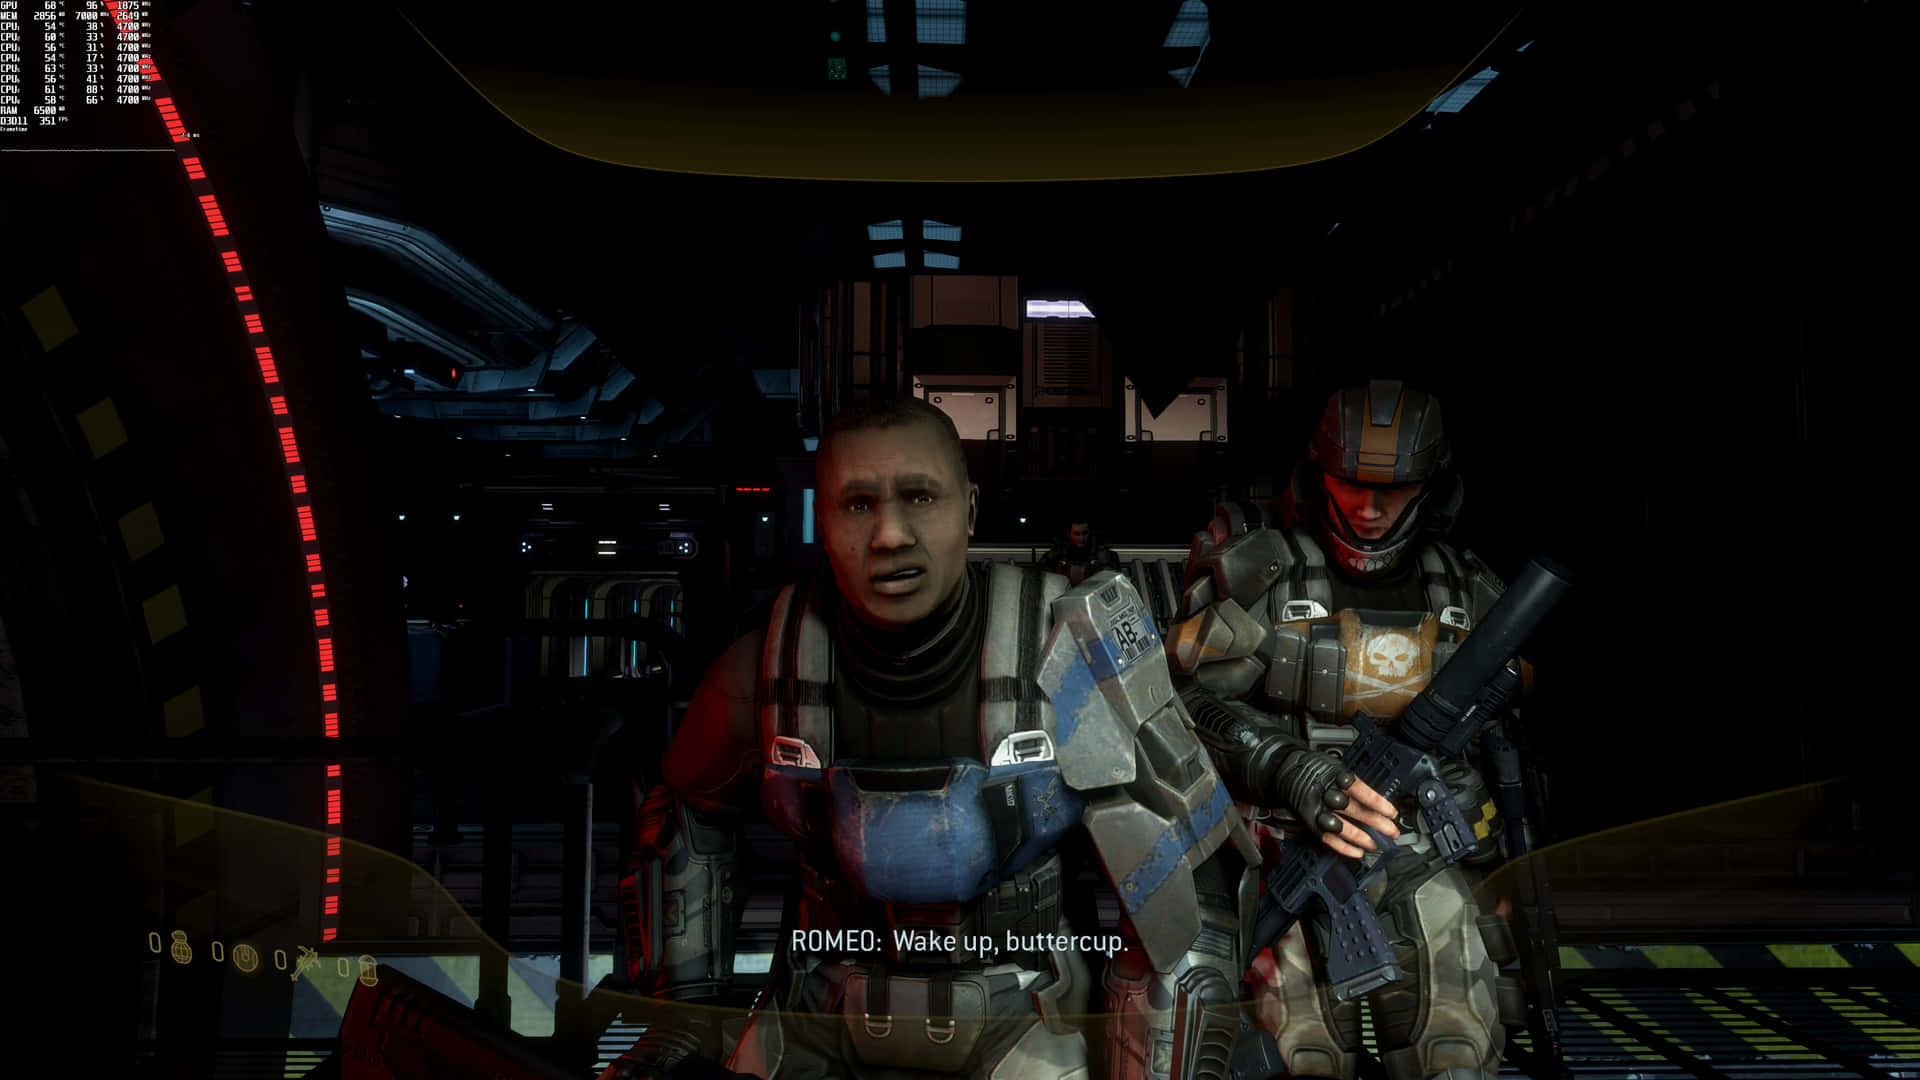 A Screenshot Of A Game With Two Men In Uniform Wallpaper